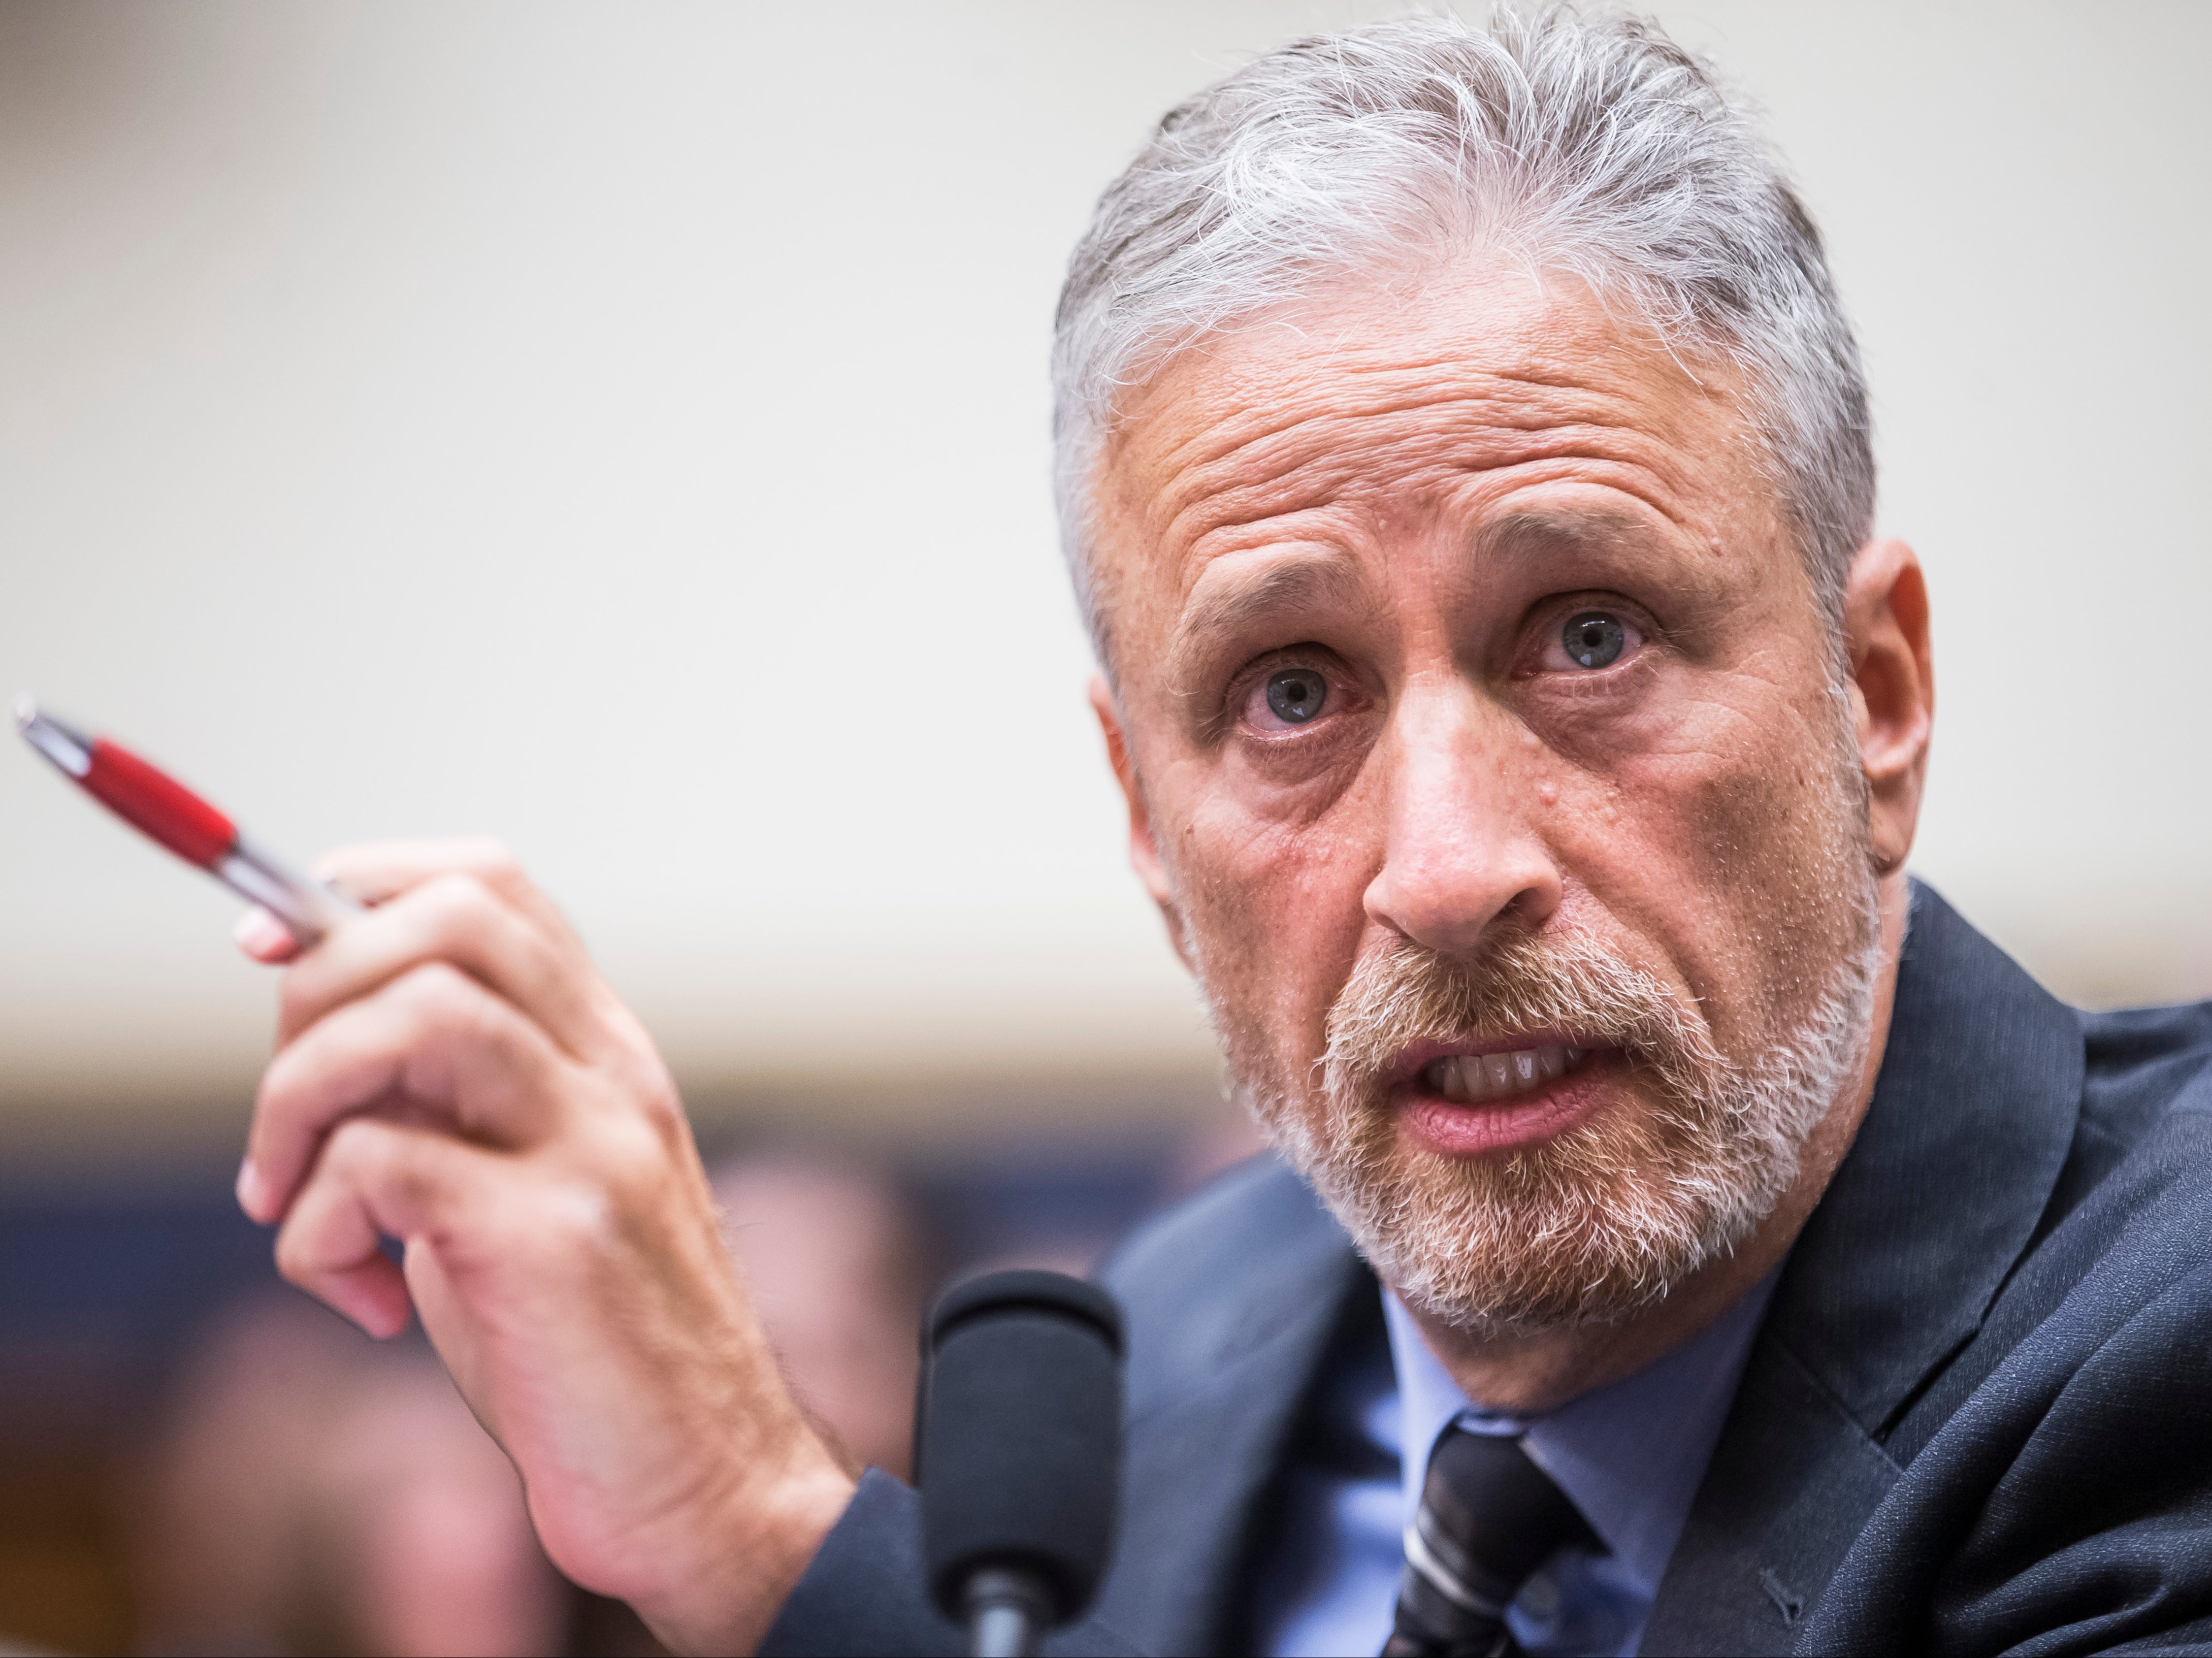 Jon Stewart testifies during a House Judiciary Committee hearing on reauthorization of the September 11th Victim Compensation Fund on Capitol Hill on 11 June 2019